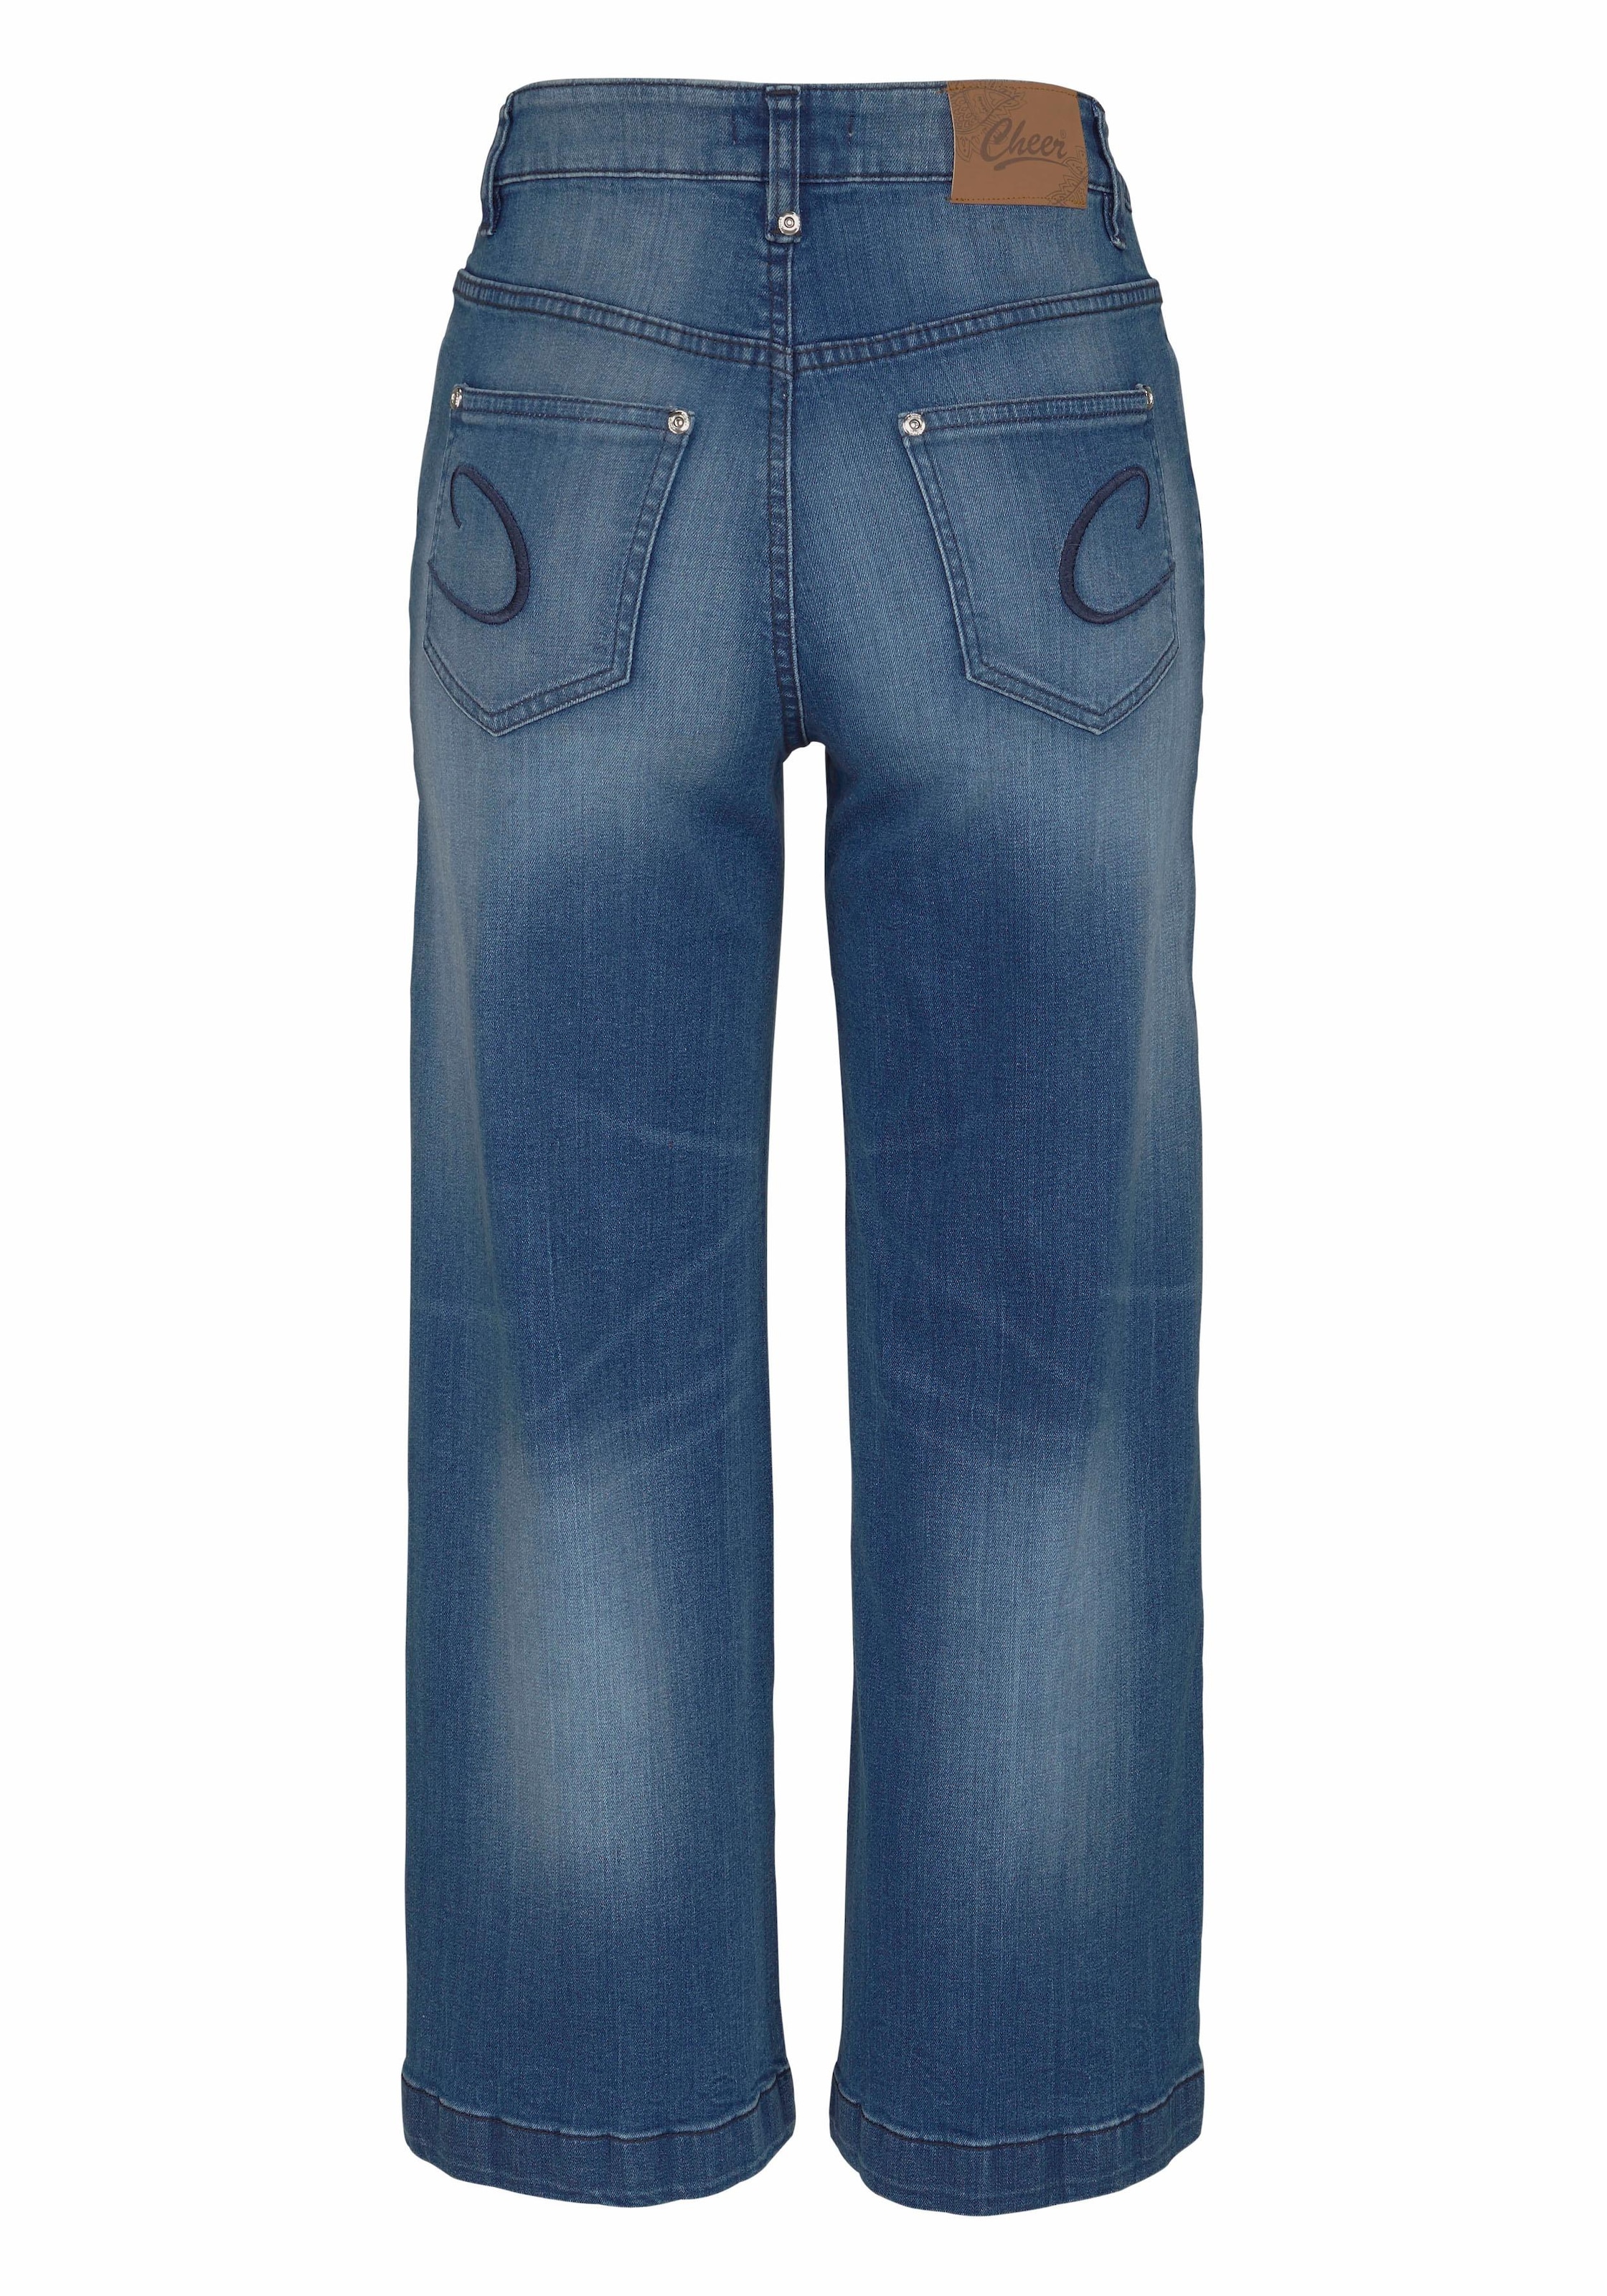 CASUAL Aniston Used-Waschung in 7/8-Jeans, shoppen